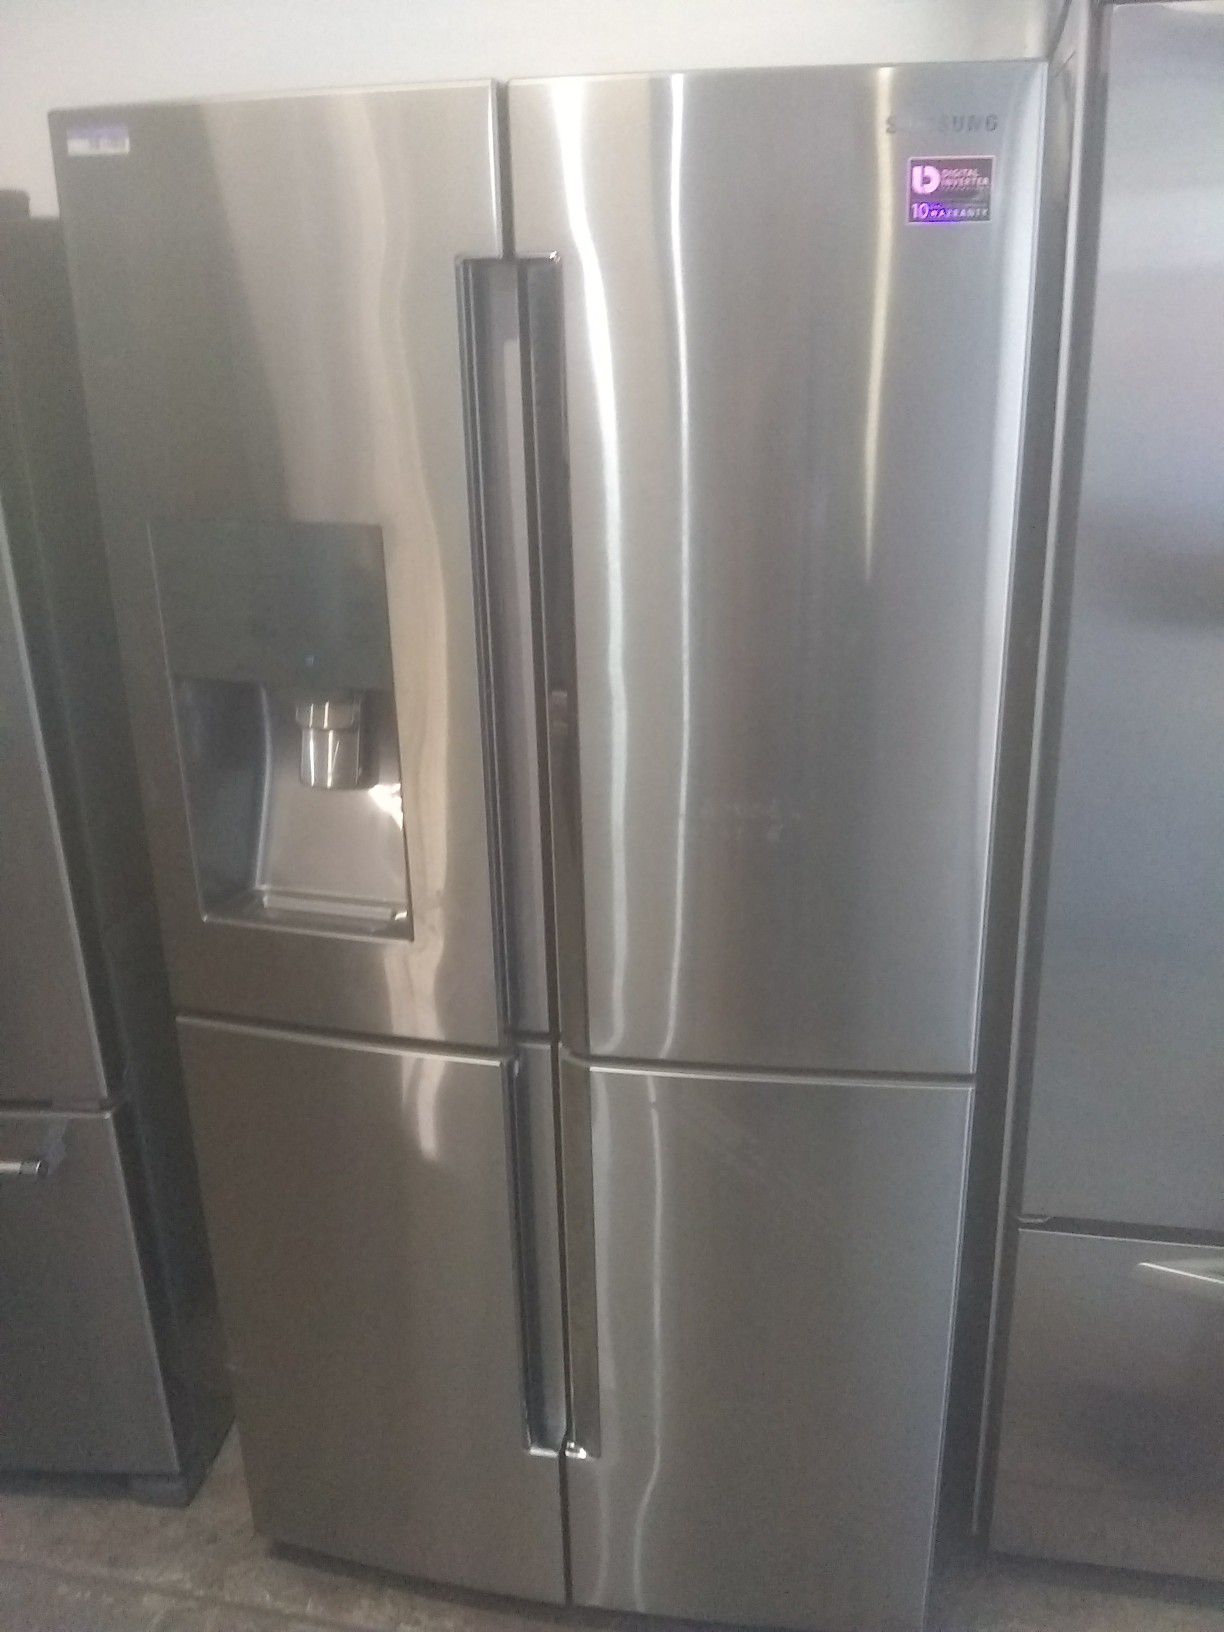 Samsung stainless steel french door refrigerator home and kitchen appliances